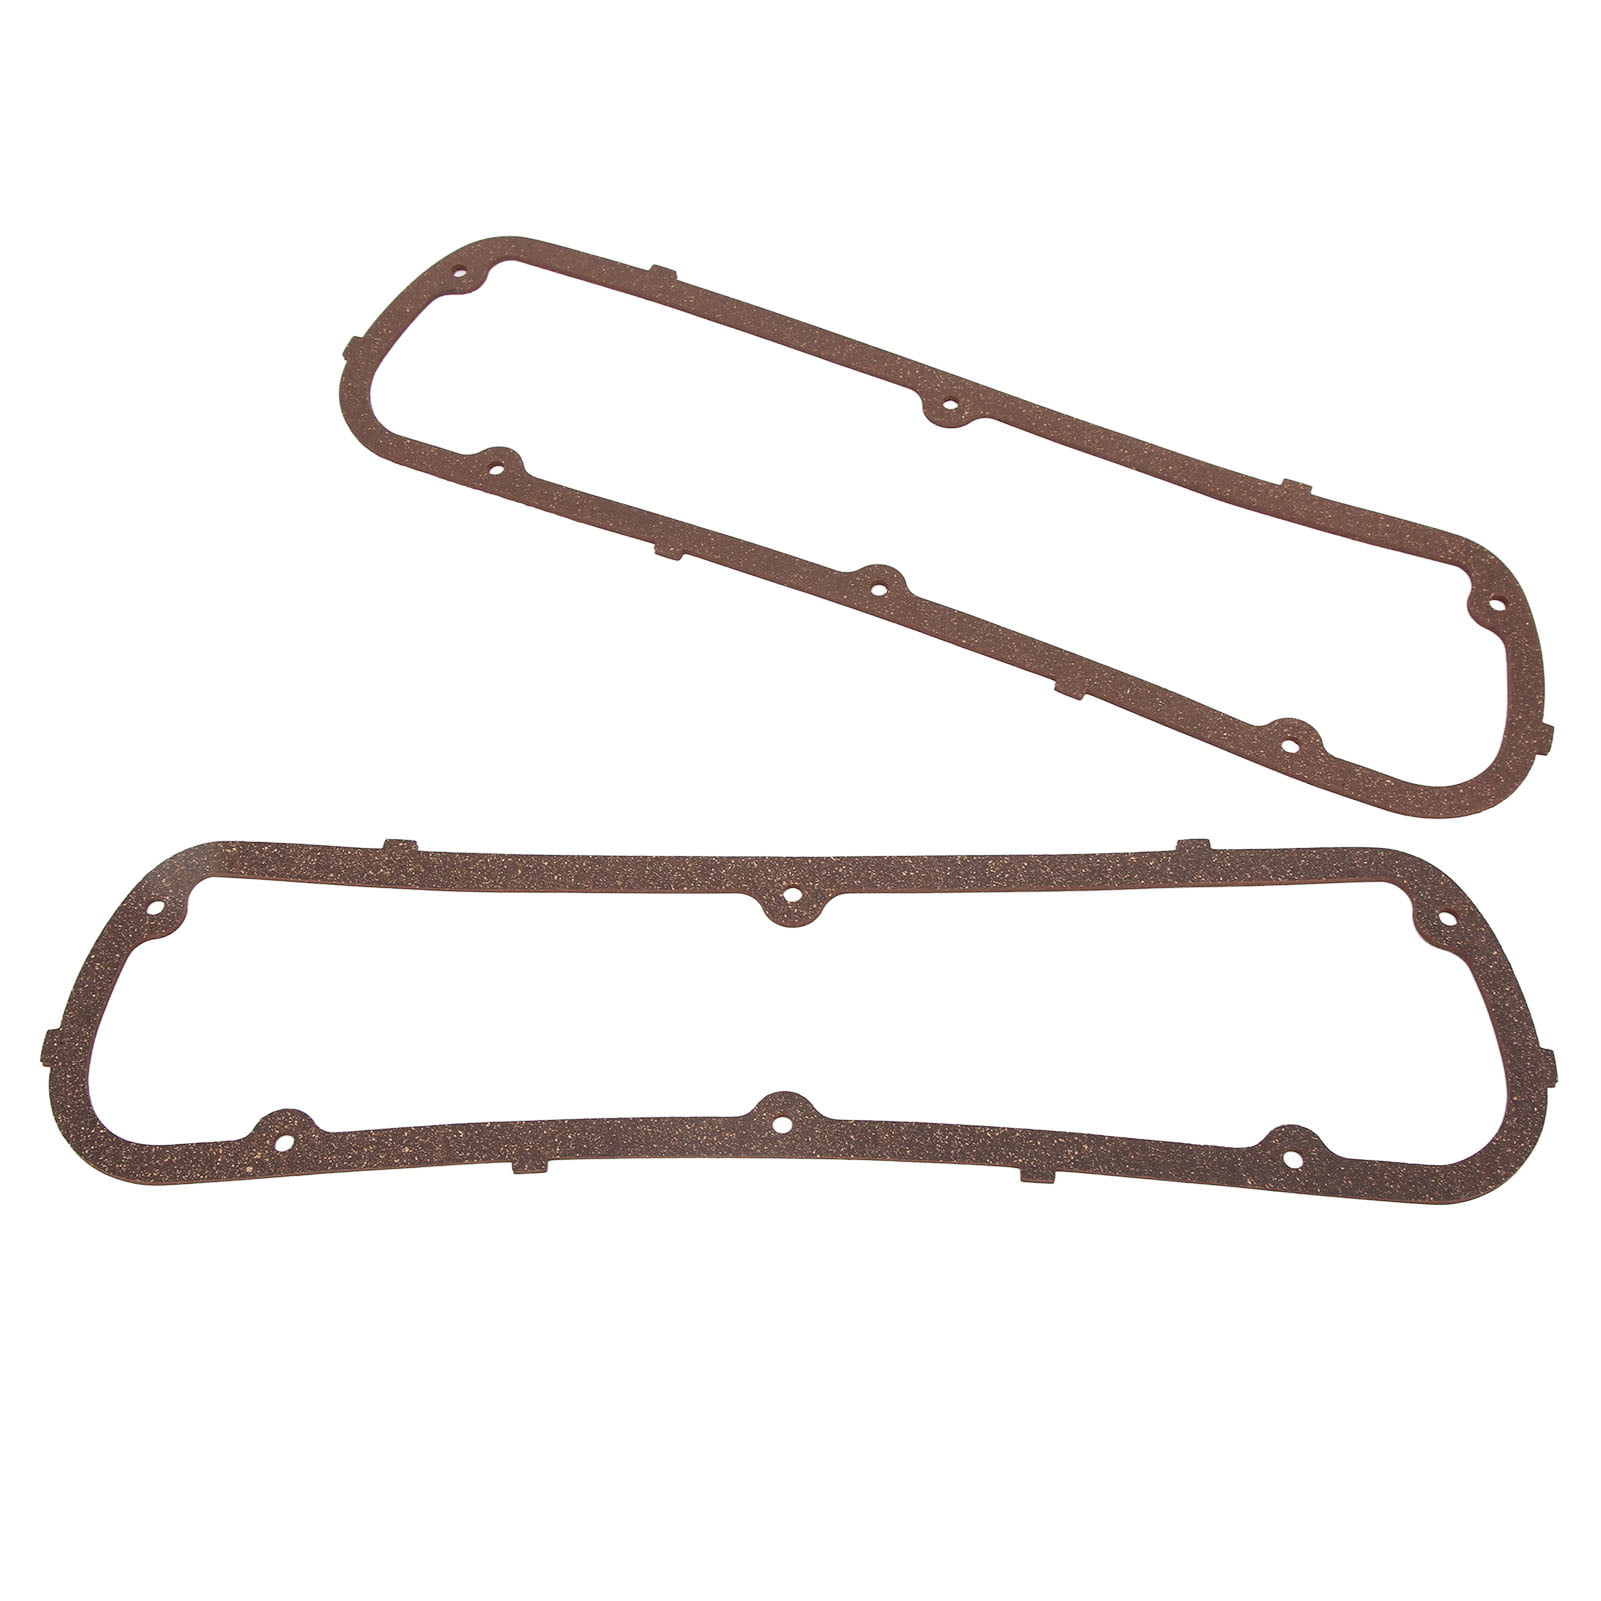 Zaqw Engine Valve Cover ,Valve Cover Gasket Set,2PCS Engine Valve Cover  Gaskets Air Oil Leakage Proof For SBF 260 289 302 347 351W